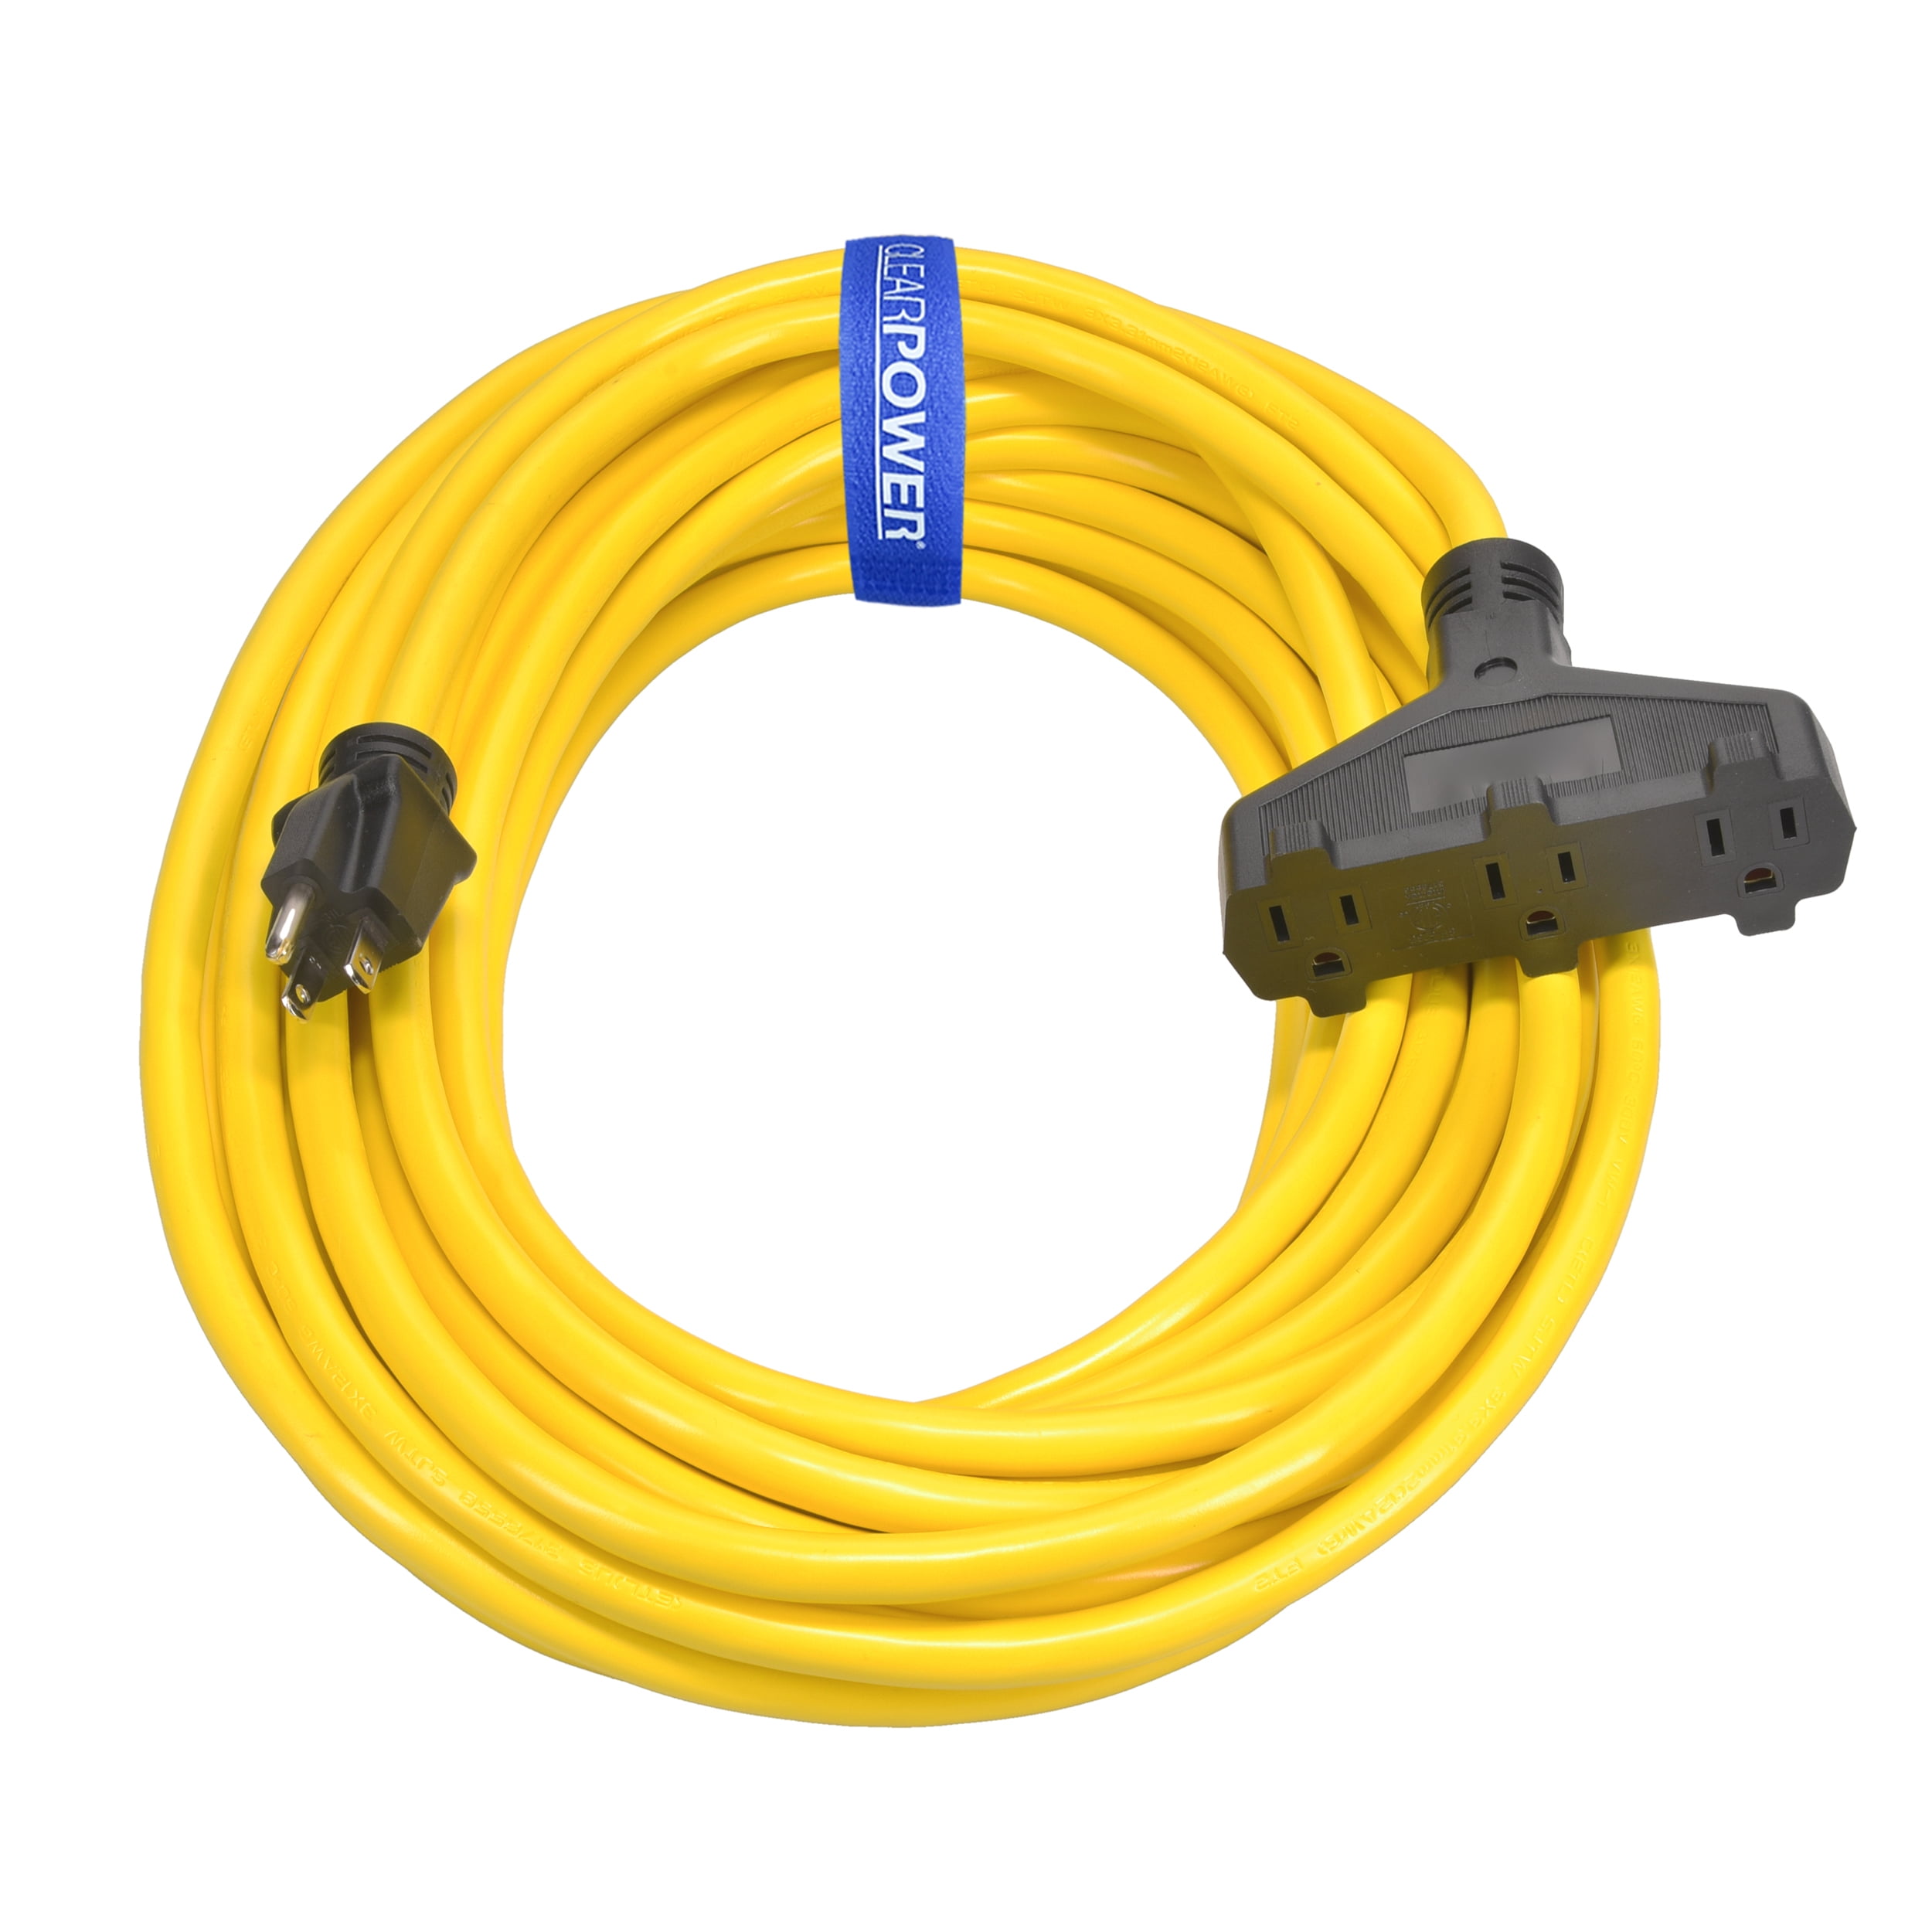 Link2Home Cord Reel 80 ft. Extension Cord 4 Power Outlets – 14 AWG SJTW  Cable. Heavy Duty High Visibility Power Cord. 